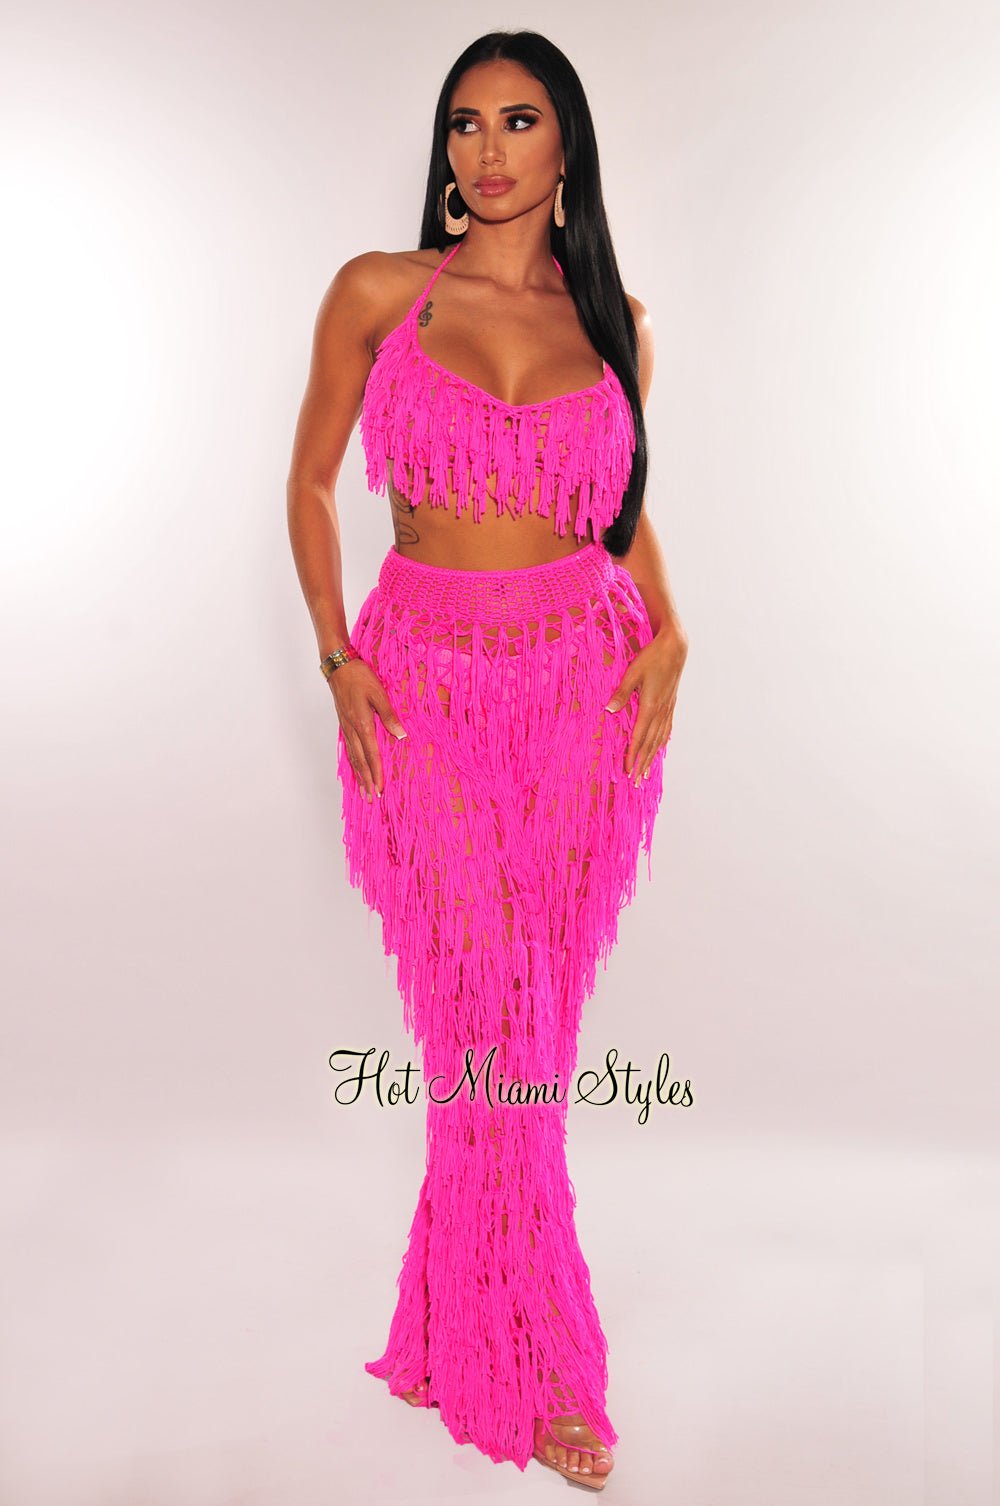 Low-Rise Neon Pink Fringe Dance Pants With Matching Fringe Top